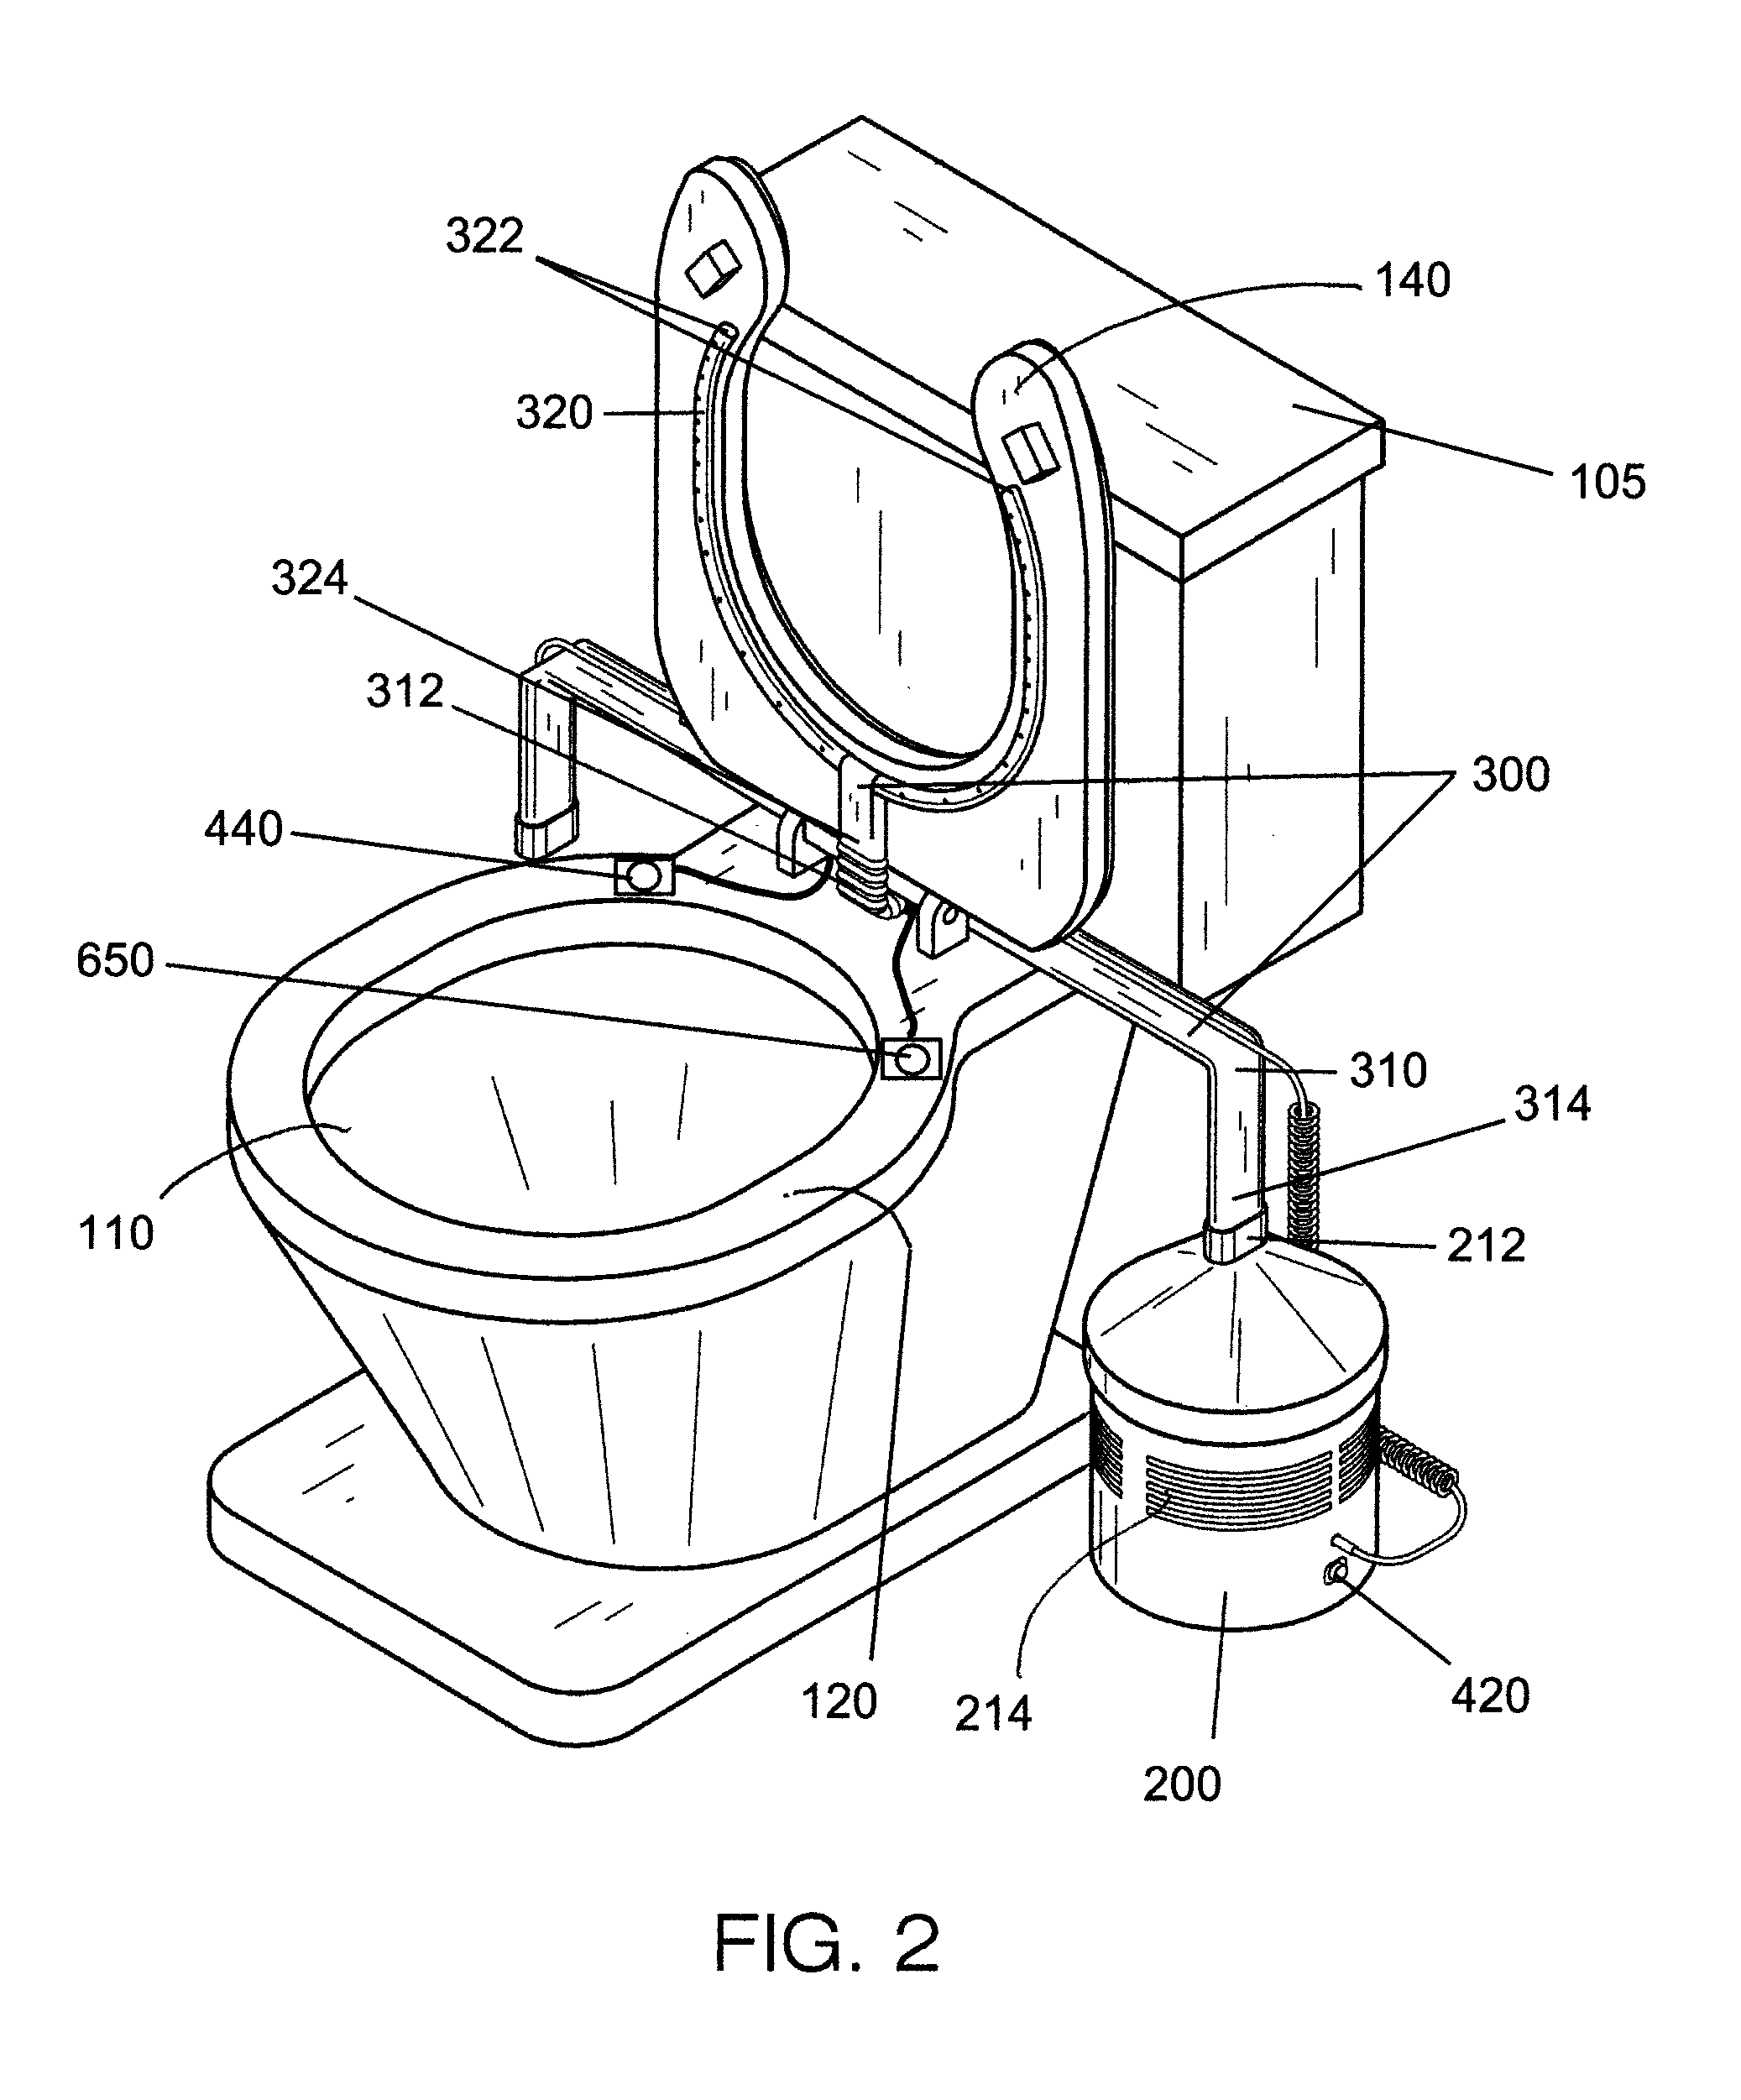 Toilet flush and odor control system